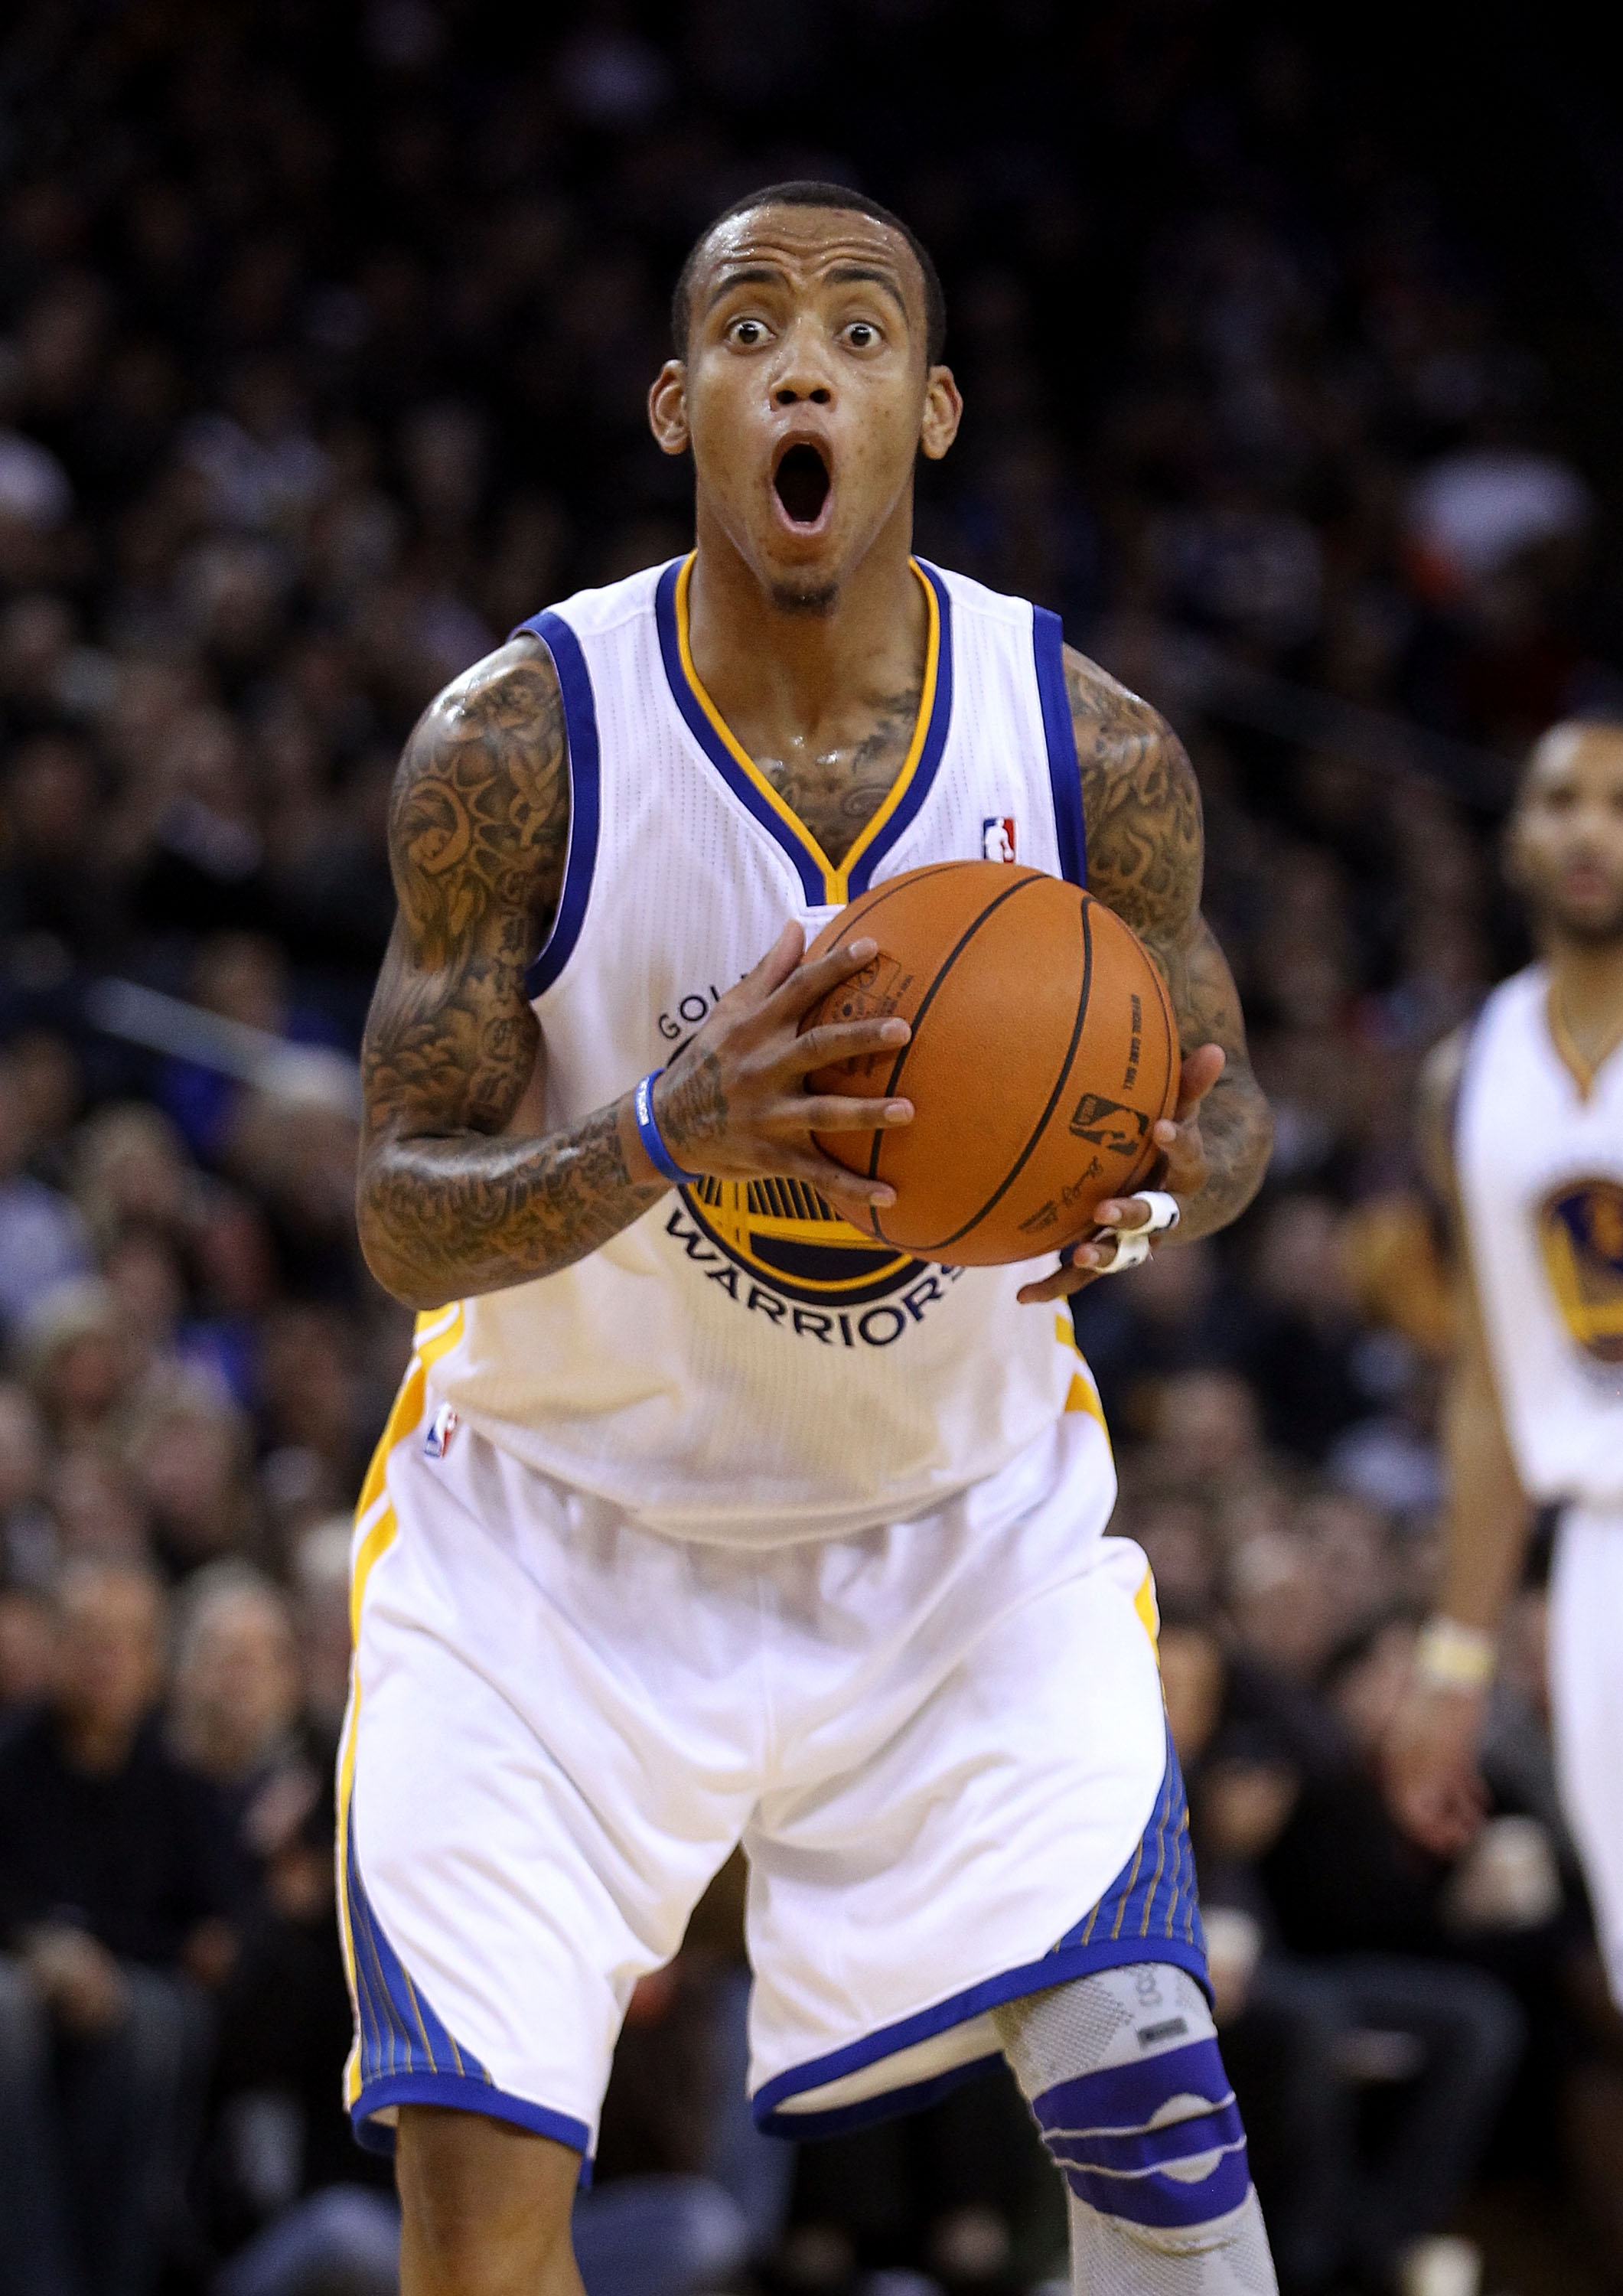 OAKLAND, CA - DECEMBER 20:  Monta Ellis #8 of the Golden State Warriors reacts after being called for an offensive foul against the Houston Rockets at Oracle Arena on December 20, 2010 in Oakland, California. NOTE TO USER: User expressly acknowledges and